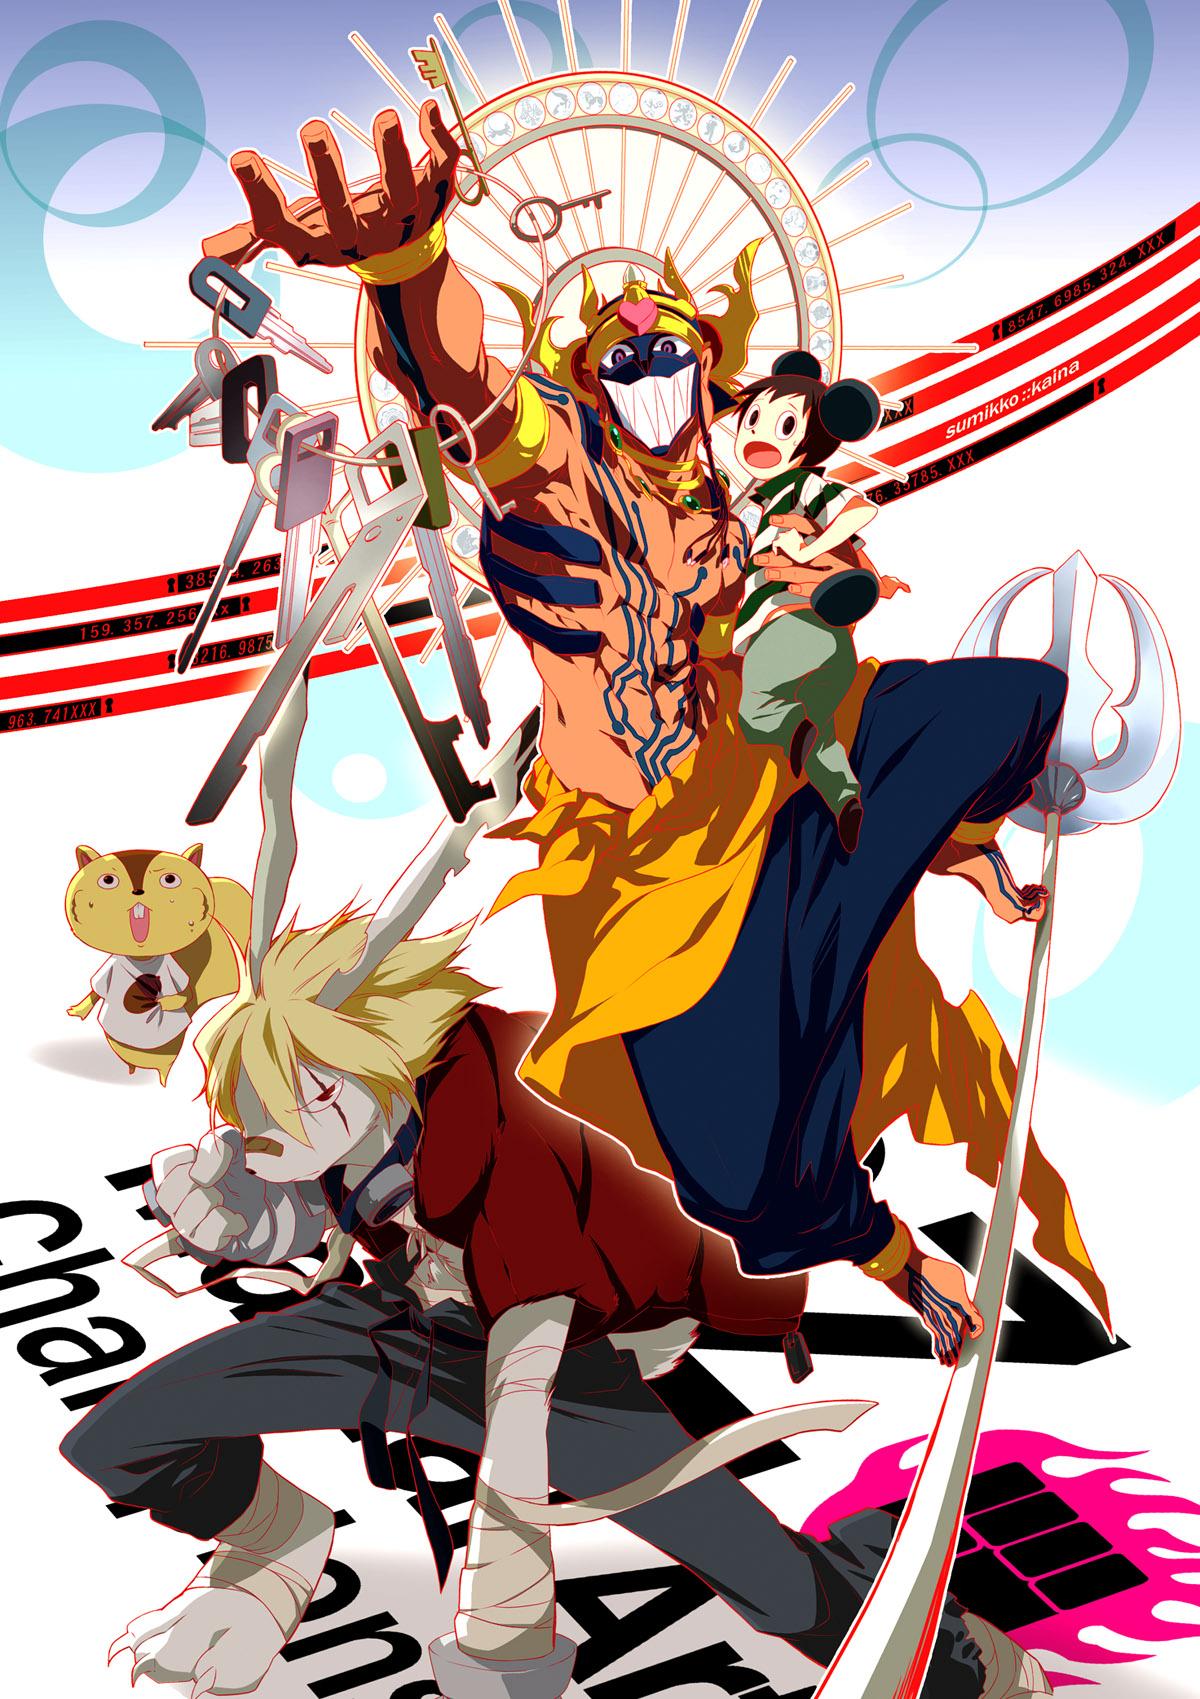 Anime Classic Summer Wars To Receive A 4DX Release For 10th Anniversary  Project  Geek Culture